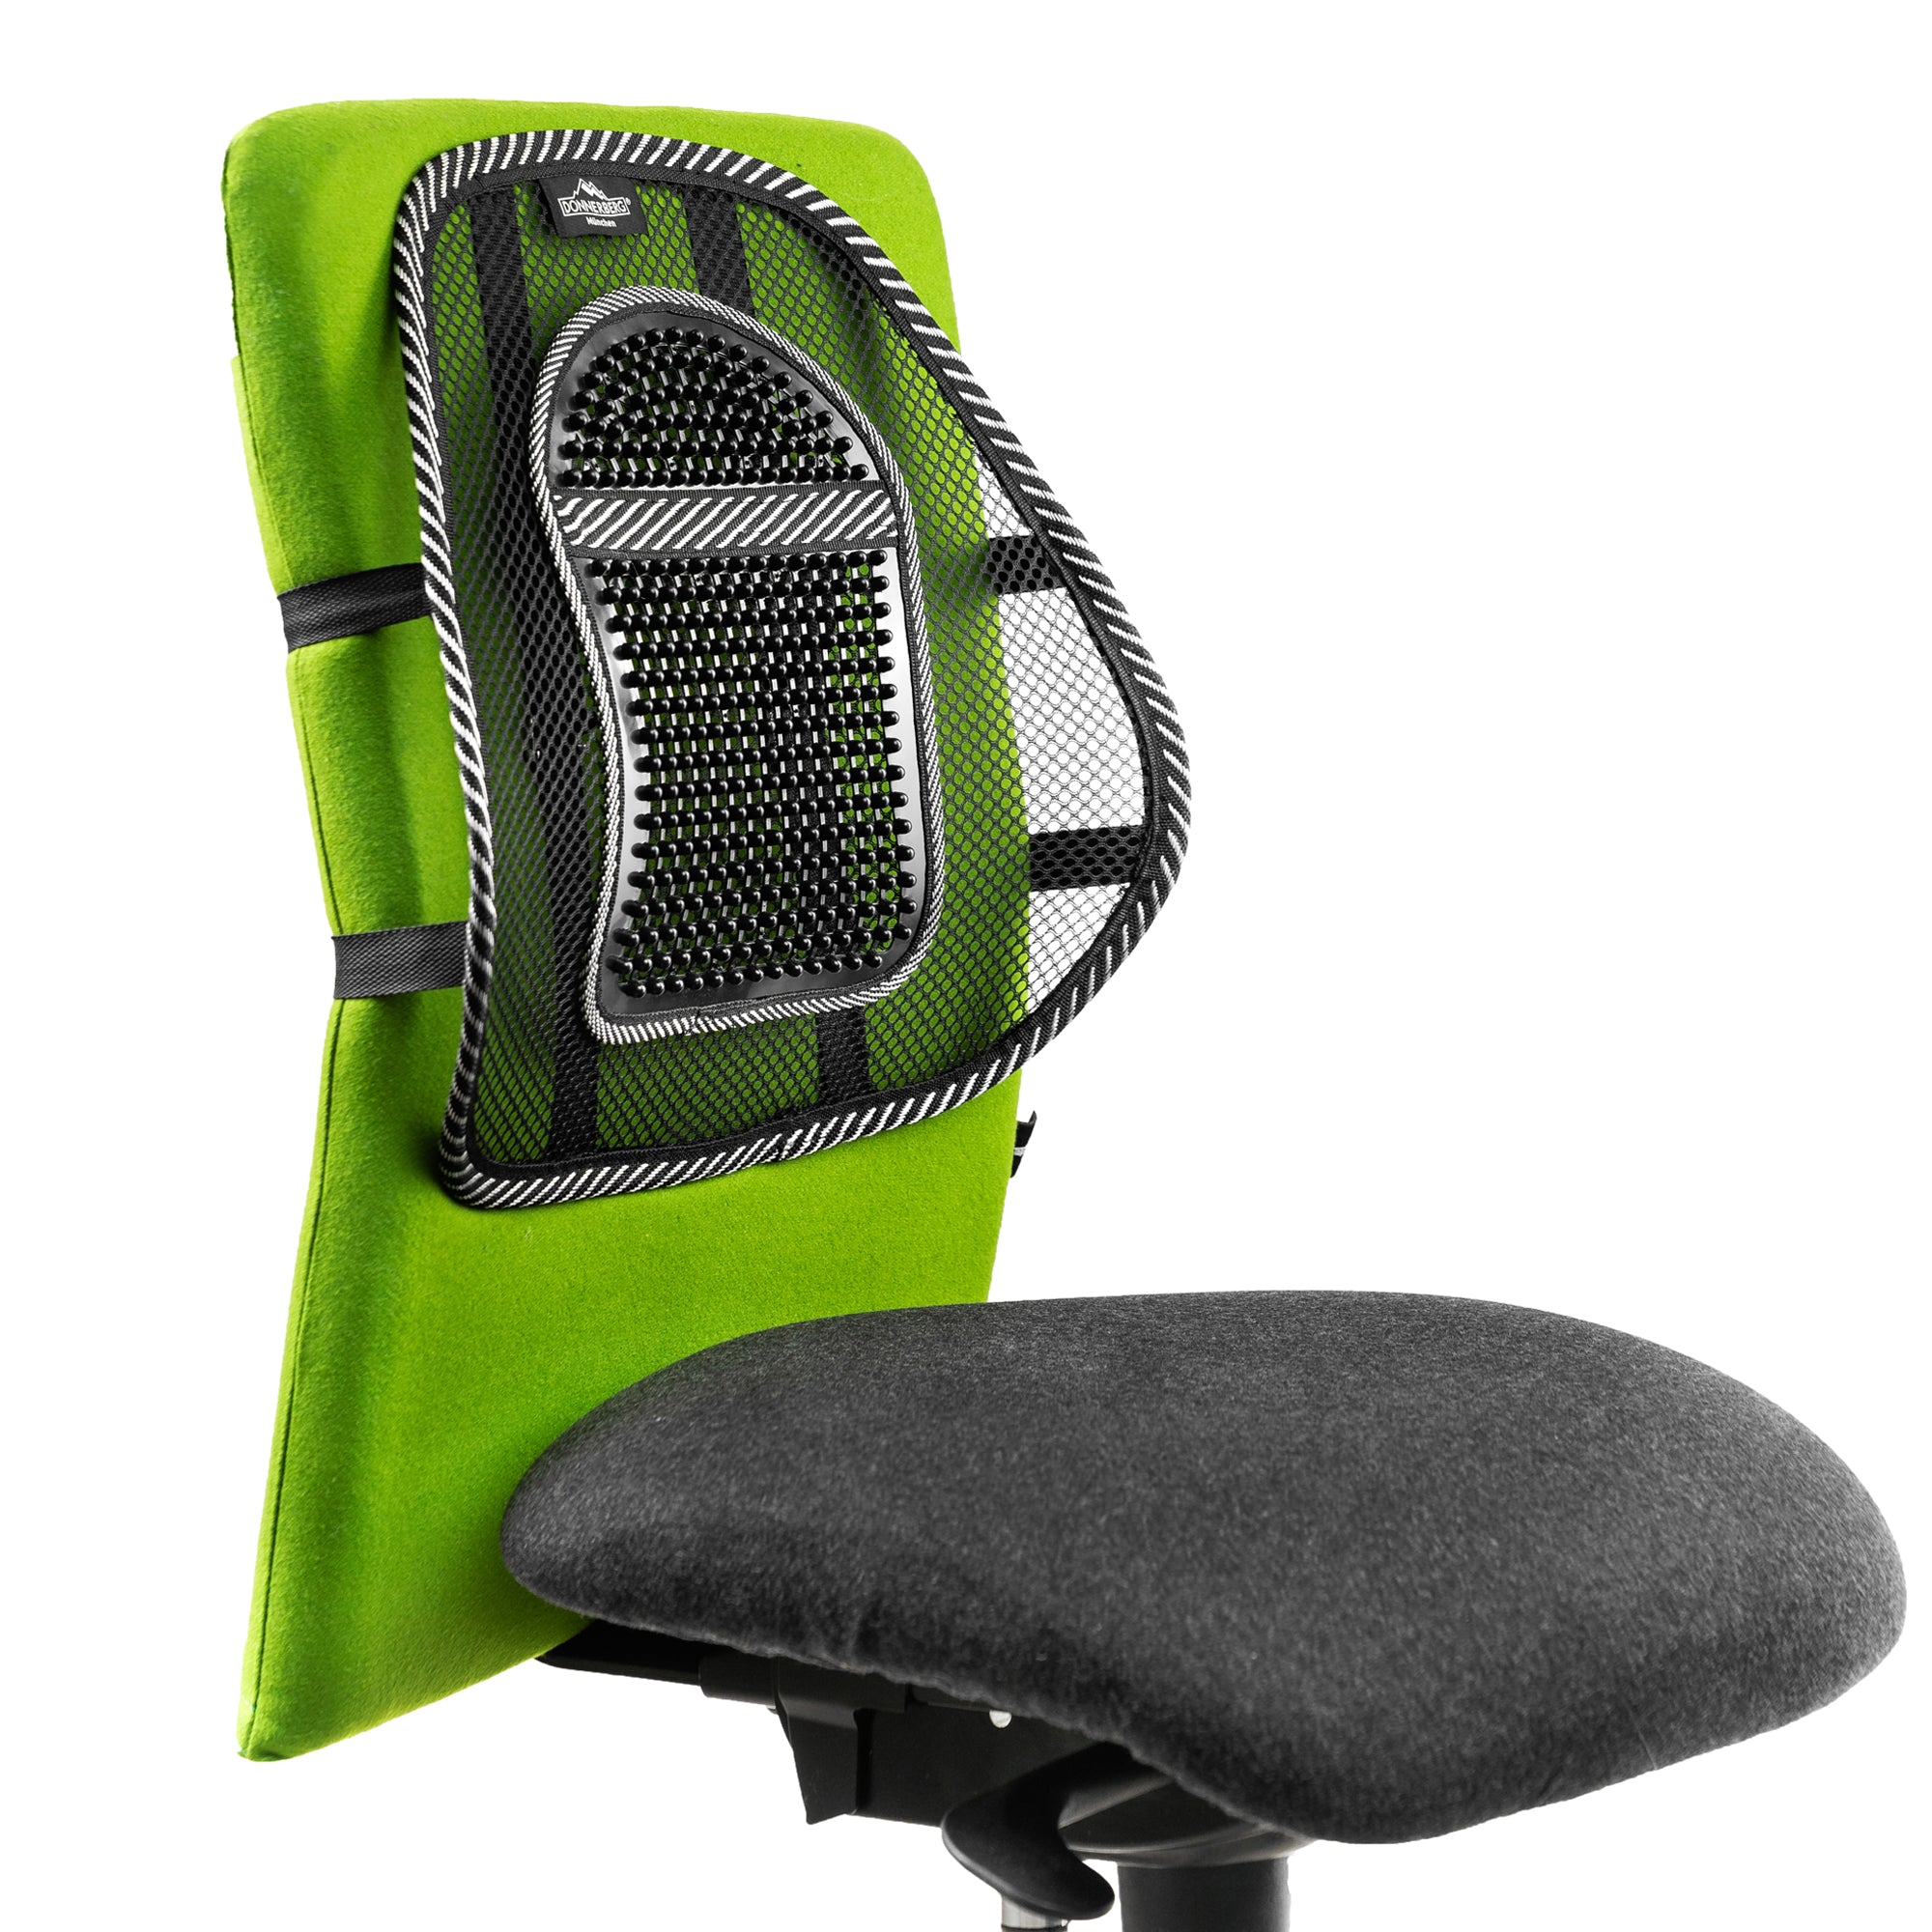 Back support on office chair